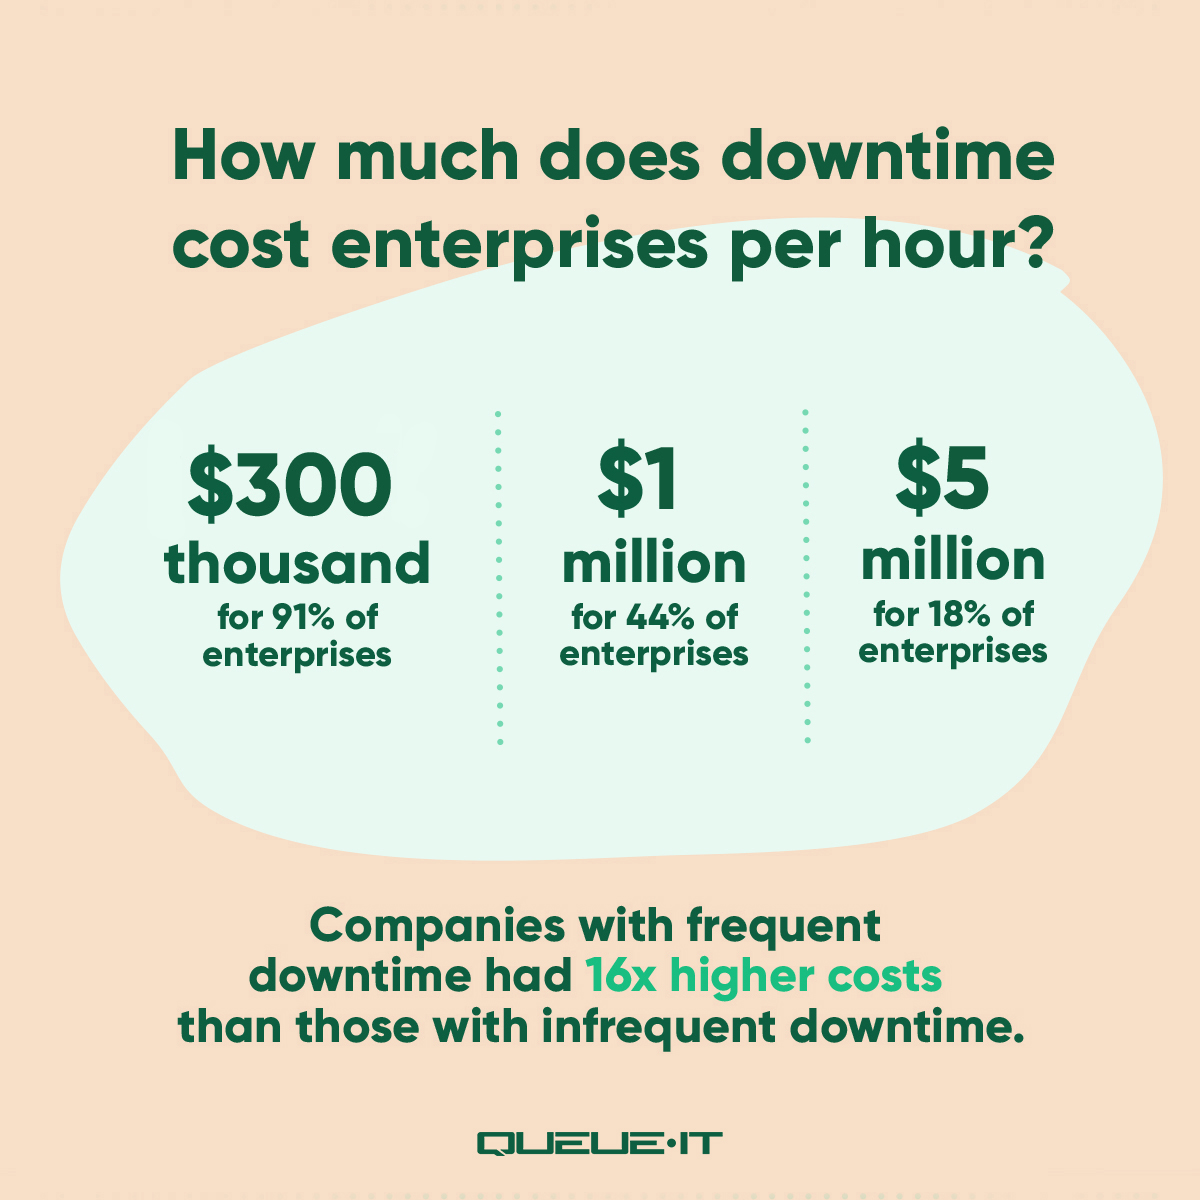 How much does downtime cost enterprises per hour? Ranges between 300 thousand to 5 million dollars